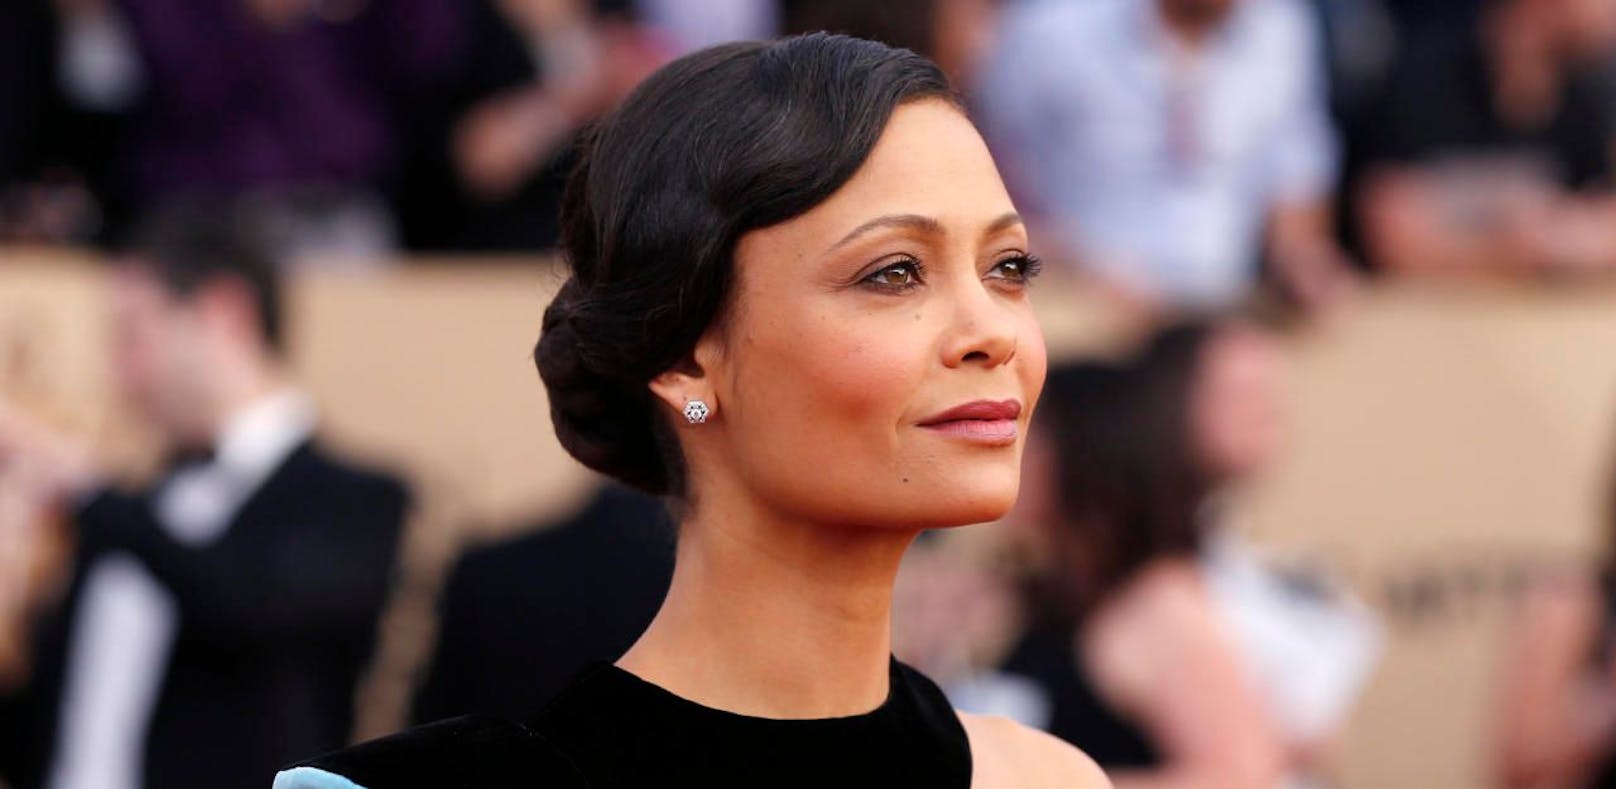 Actress Thandie Newton arrives at the 23rd Screen Actors Guild Awards in Los Angeles, California, U.S., January 29, 2017.  REUTERS/Mario Anzuoni - RTSXYXC